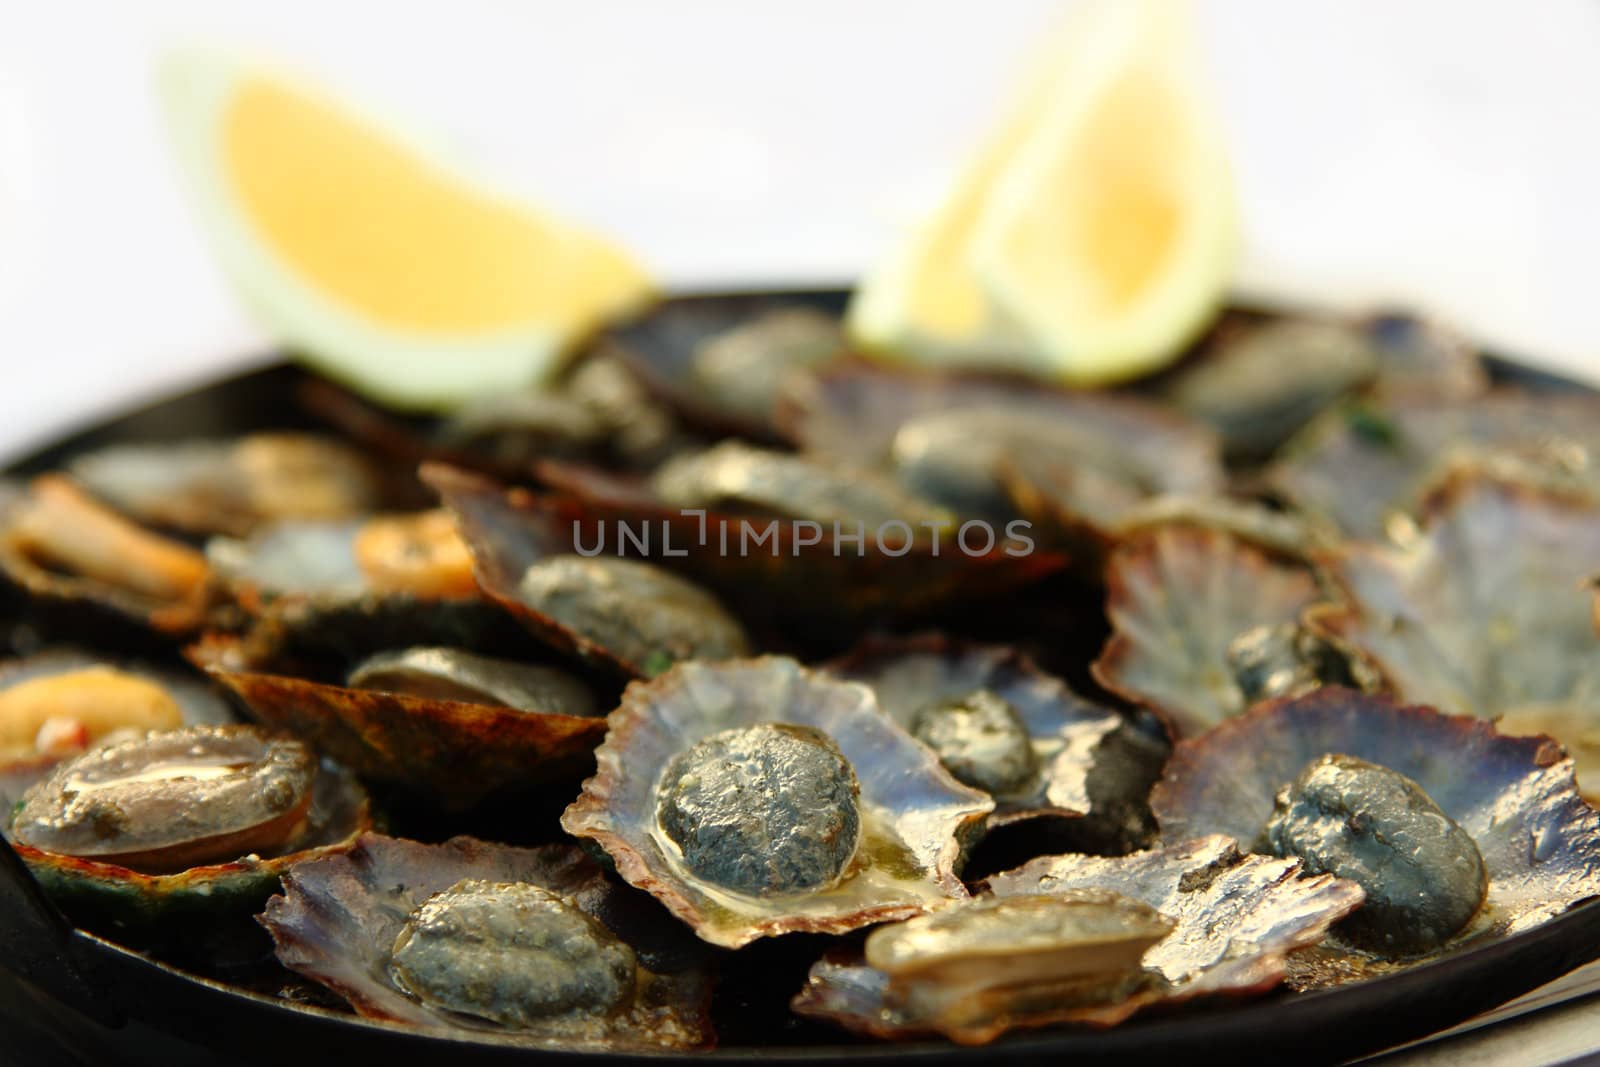 Grilled limpets with lemon. Madeira's traditional dish.